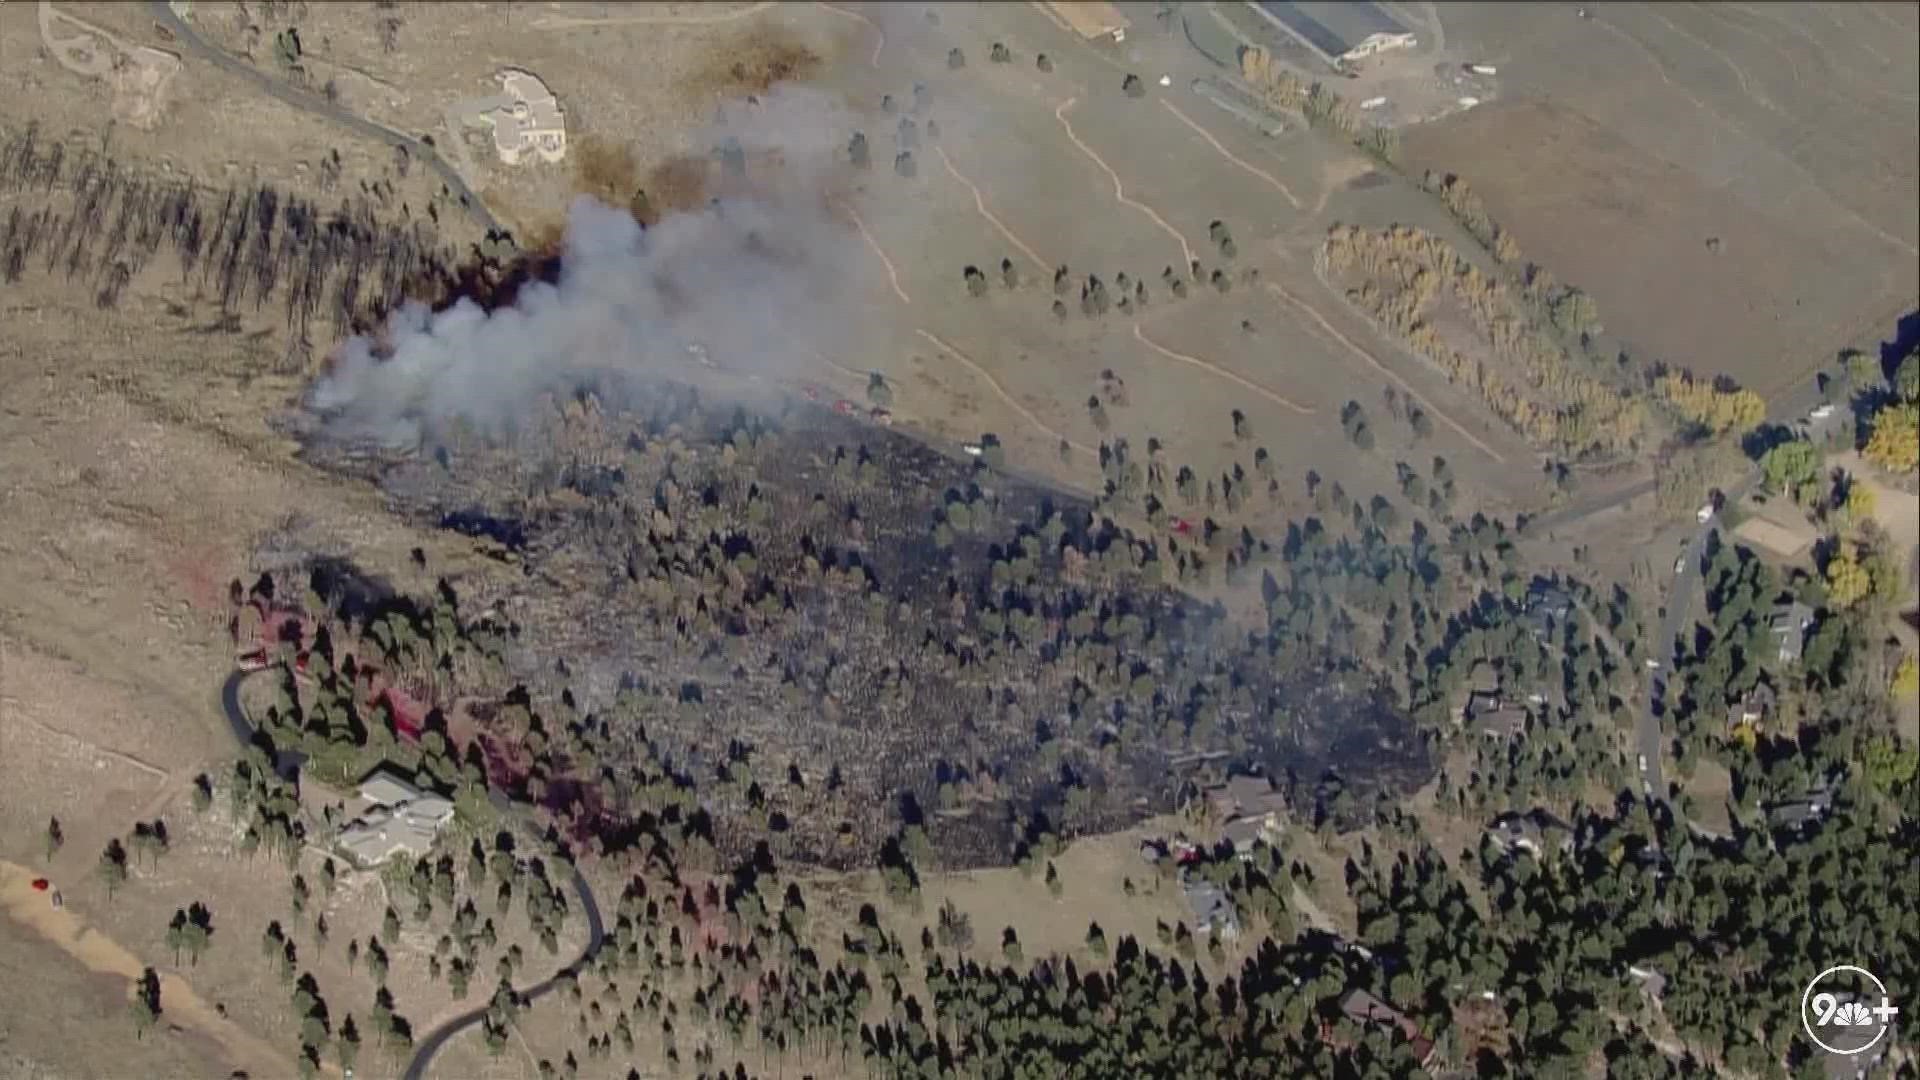 The small wildfire burned just off Highway 36 north of Boulder and forced people who live nearby to evacuate.